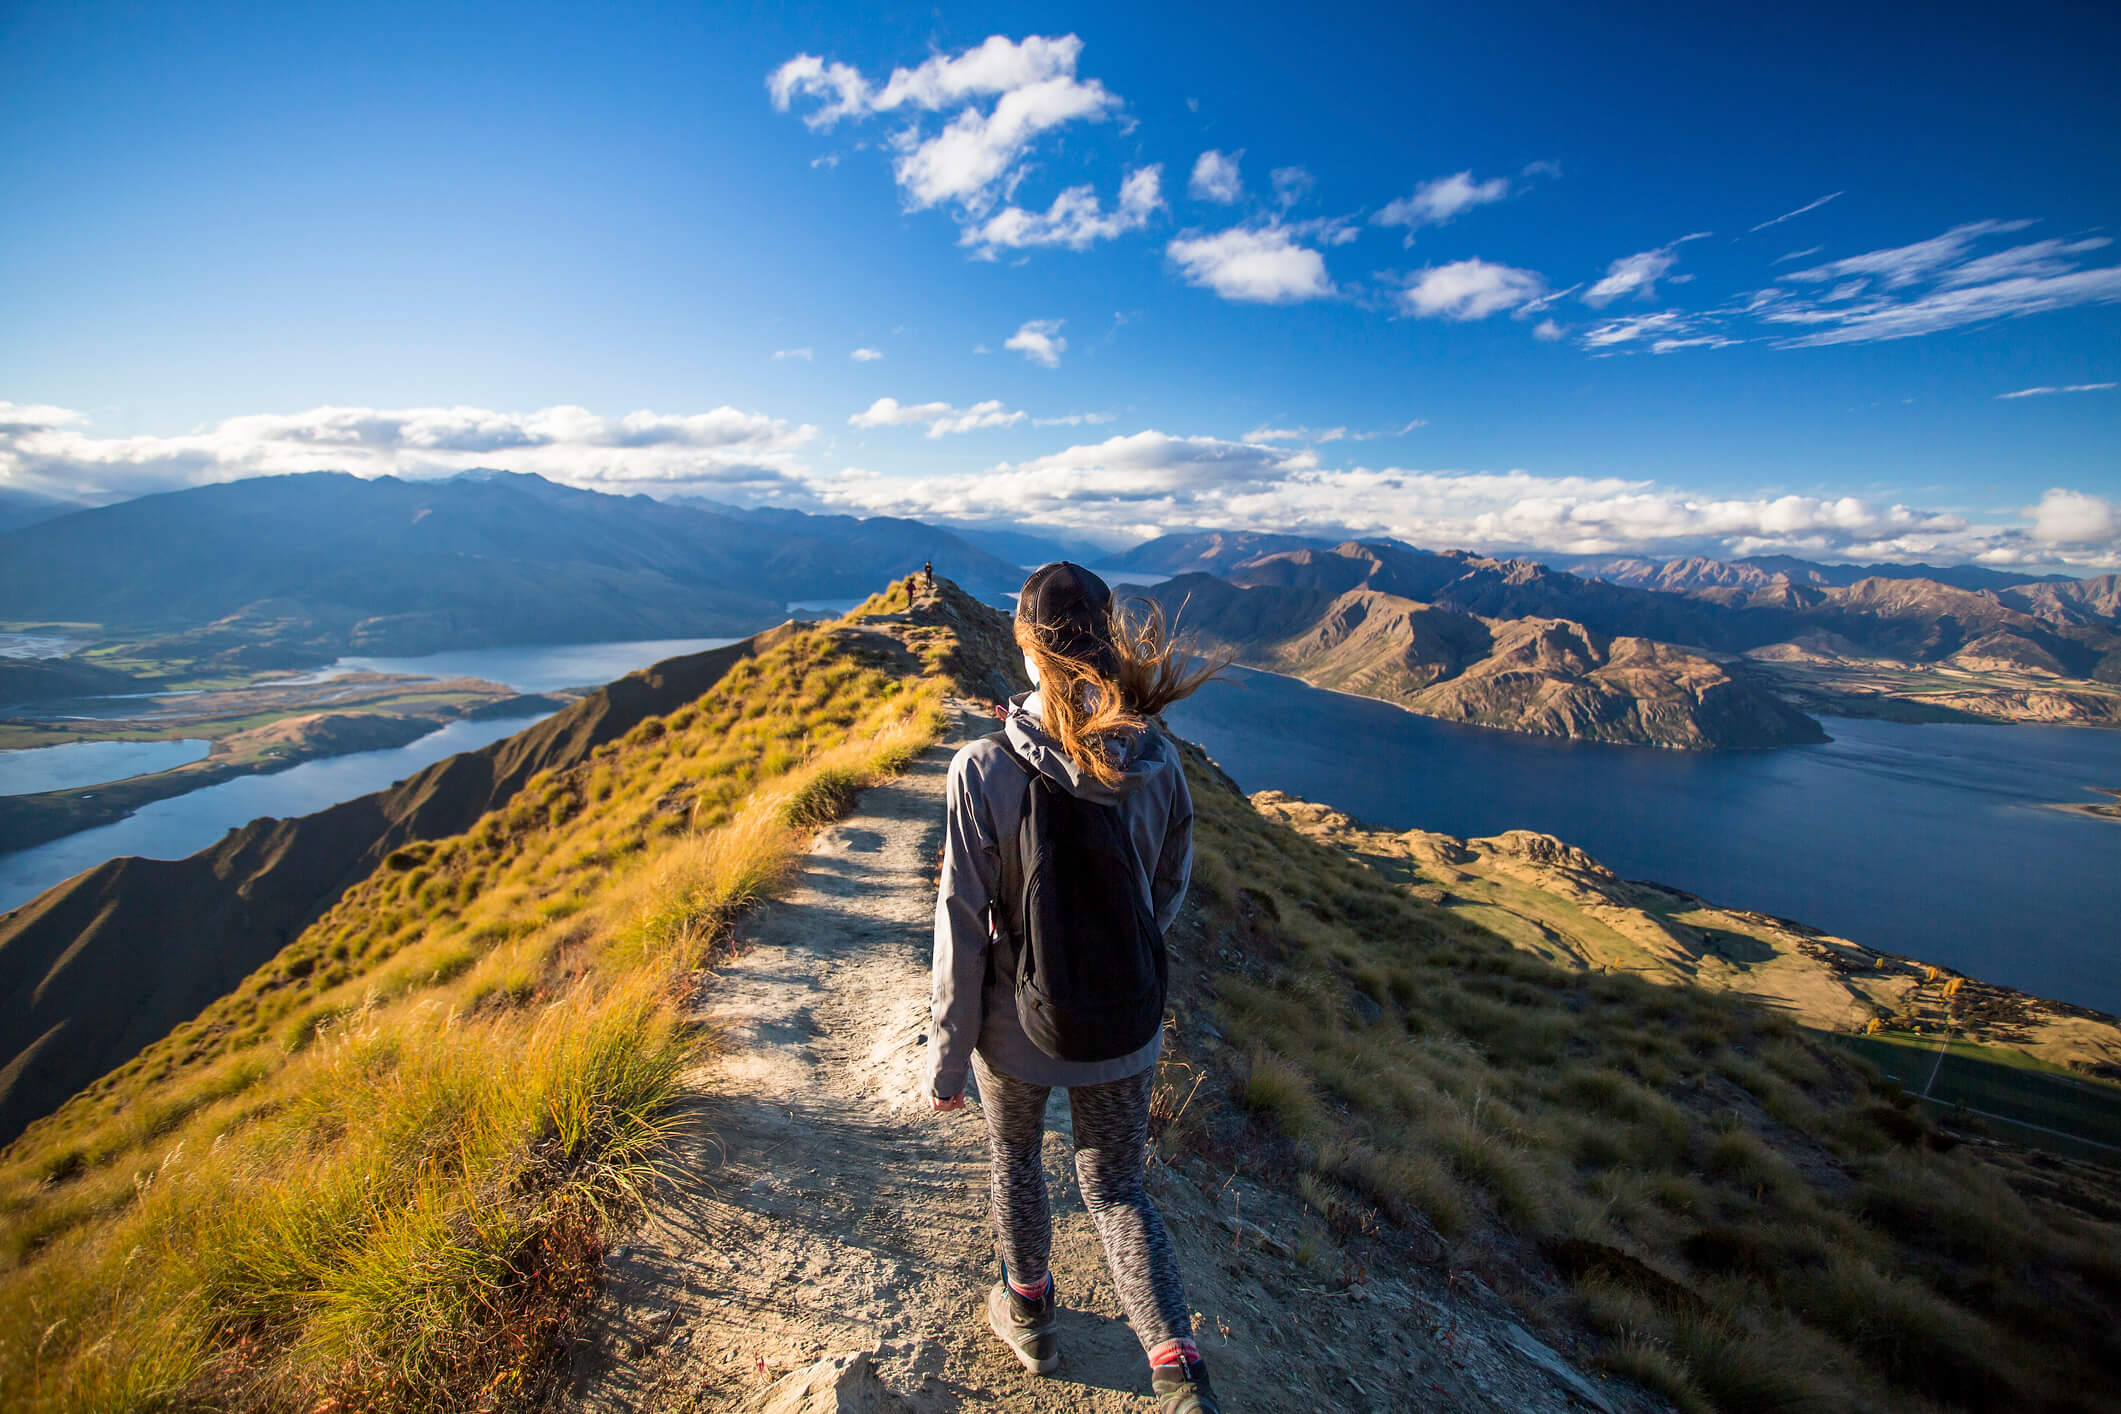 a New Zealand working holiday maker admiring nature